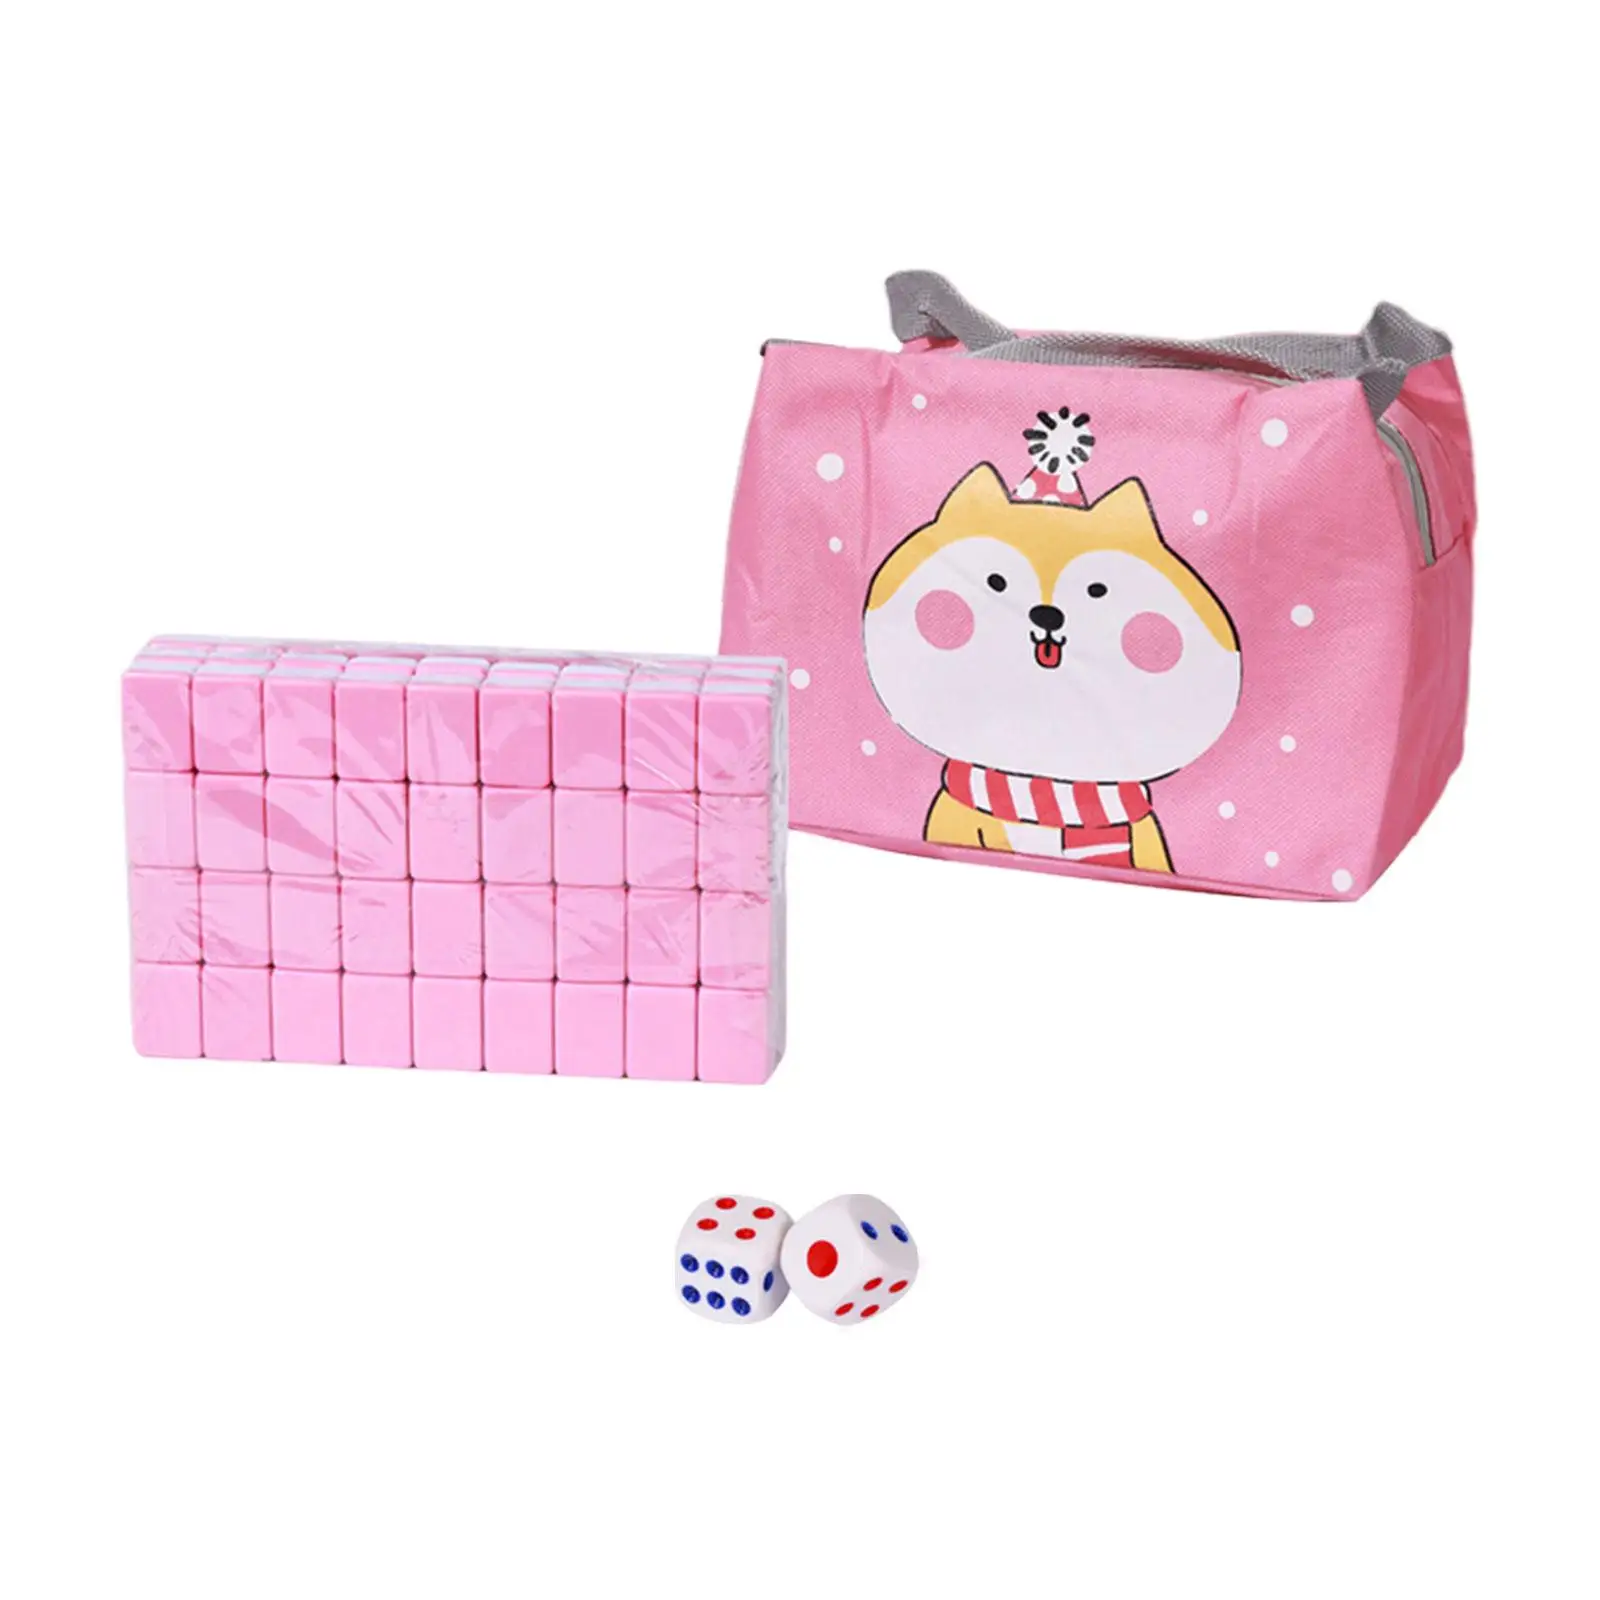 

Travel Mini Mahjong Set with Carrying Bag 2 Dices Mini Mahjong for Parties Indoor Entertainment Accessories Classic Tiles Games